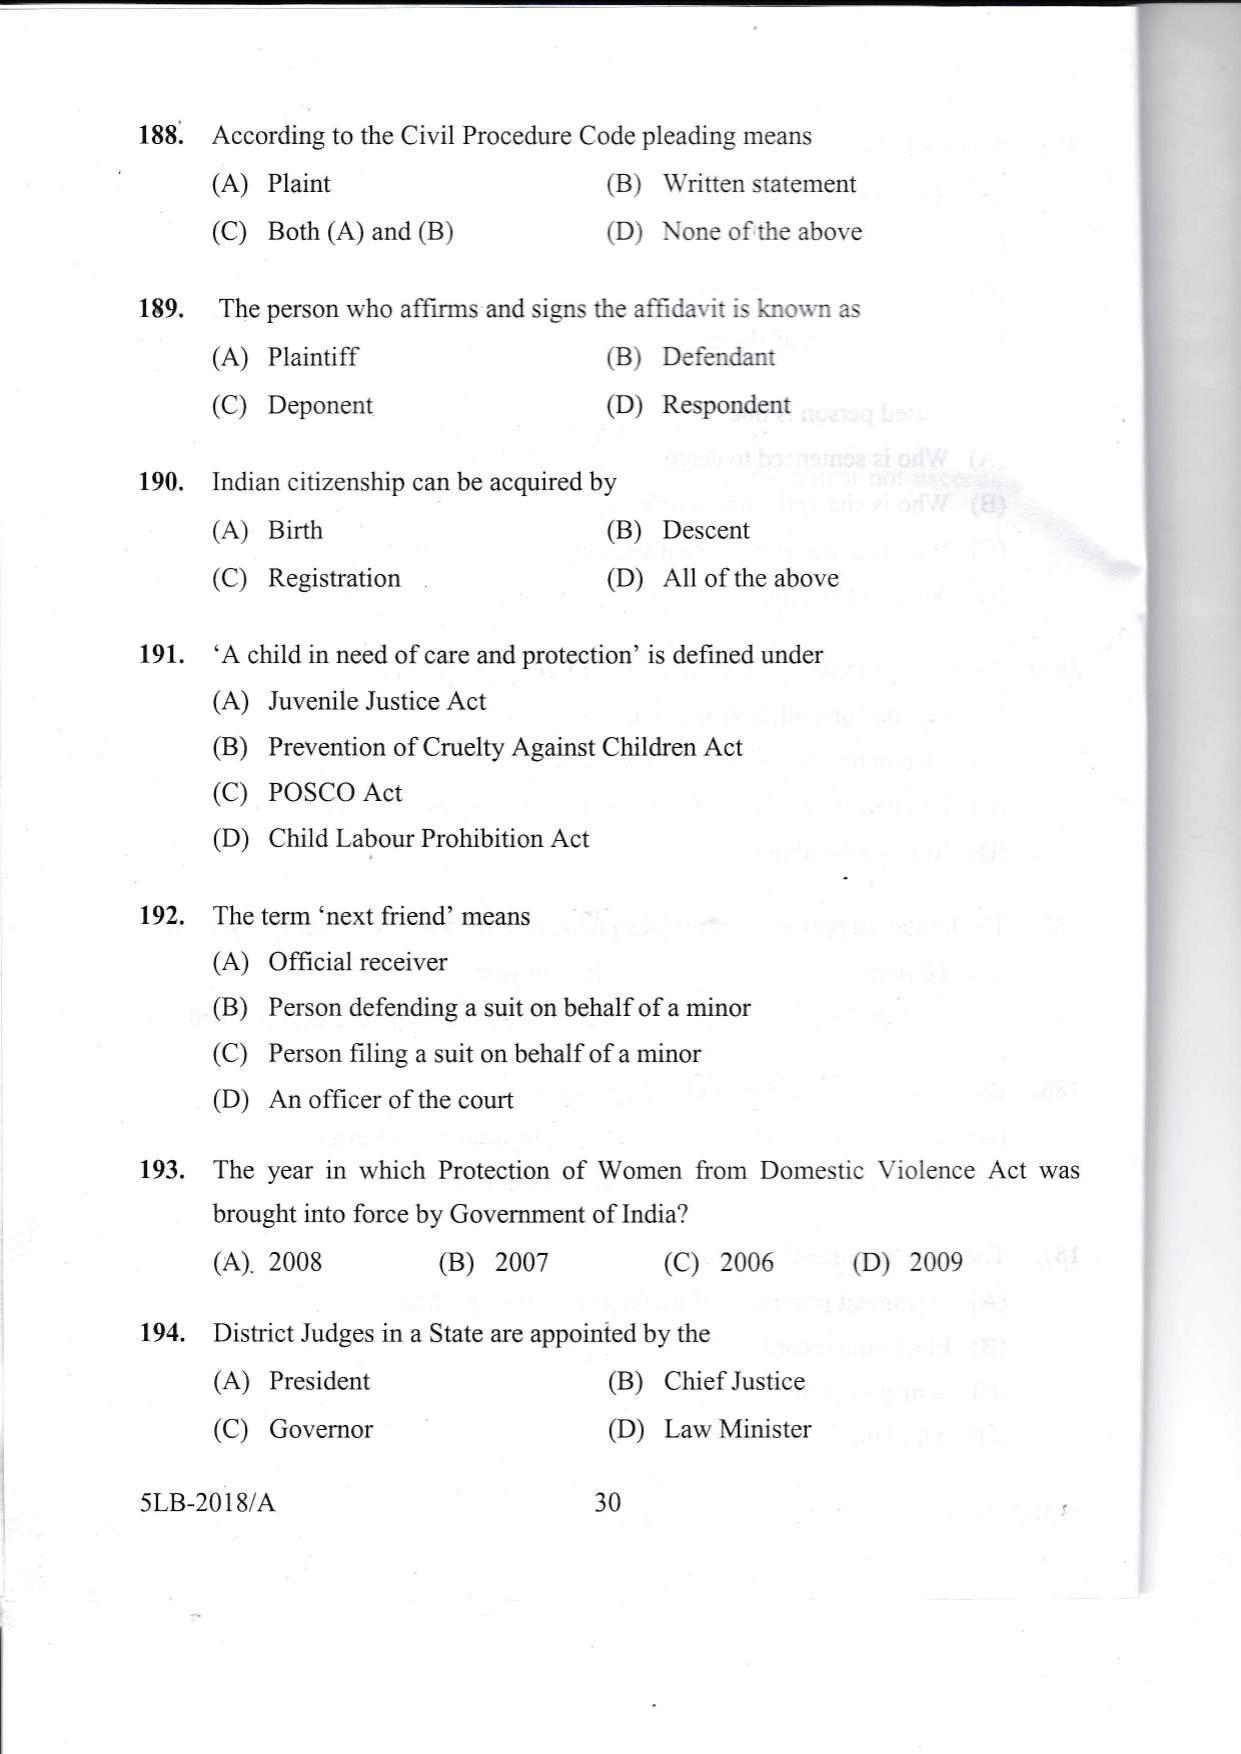 KLEE 5 Year LLB Exam 2018 Question Paper - Page 30